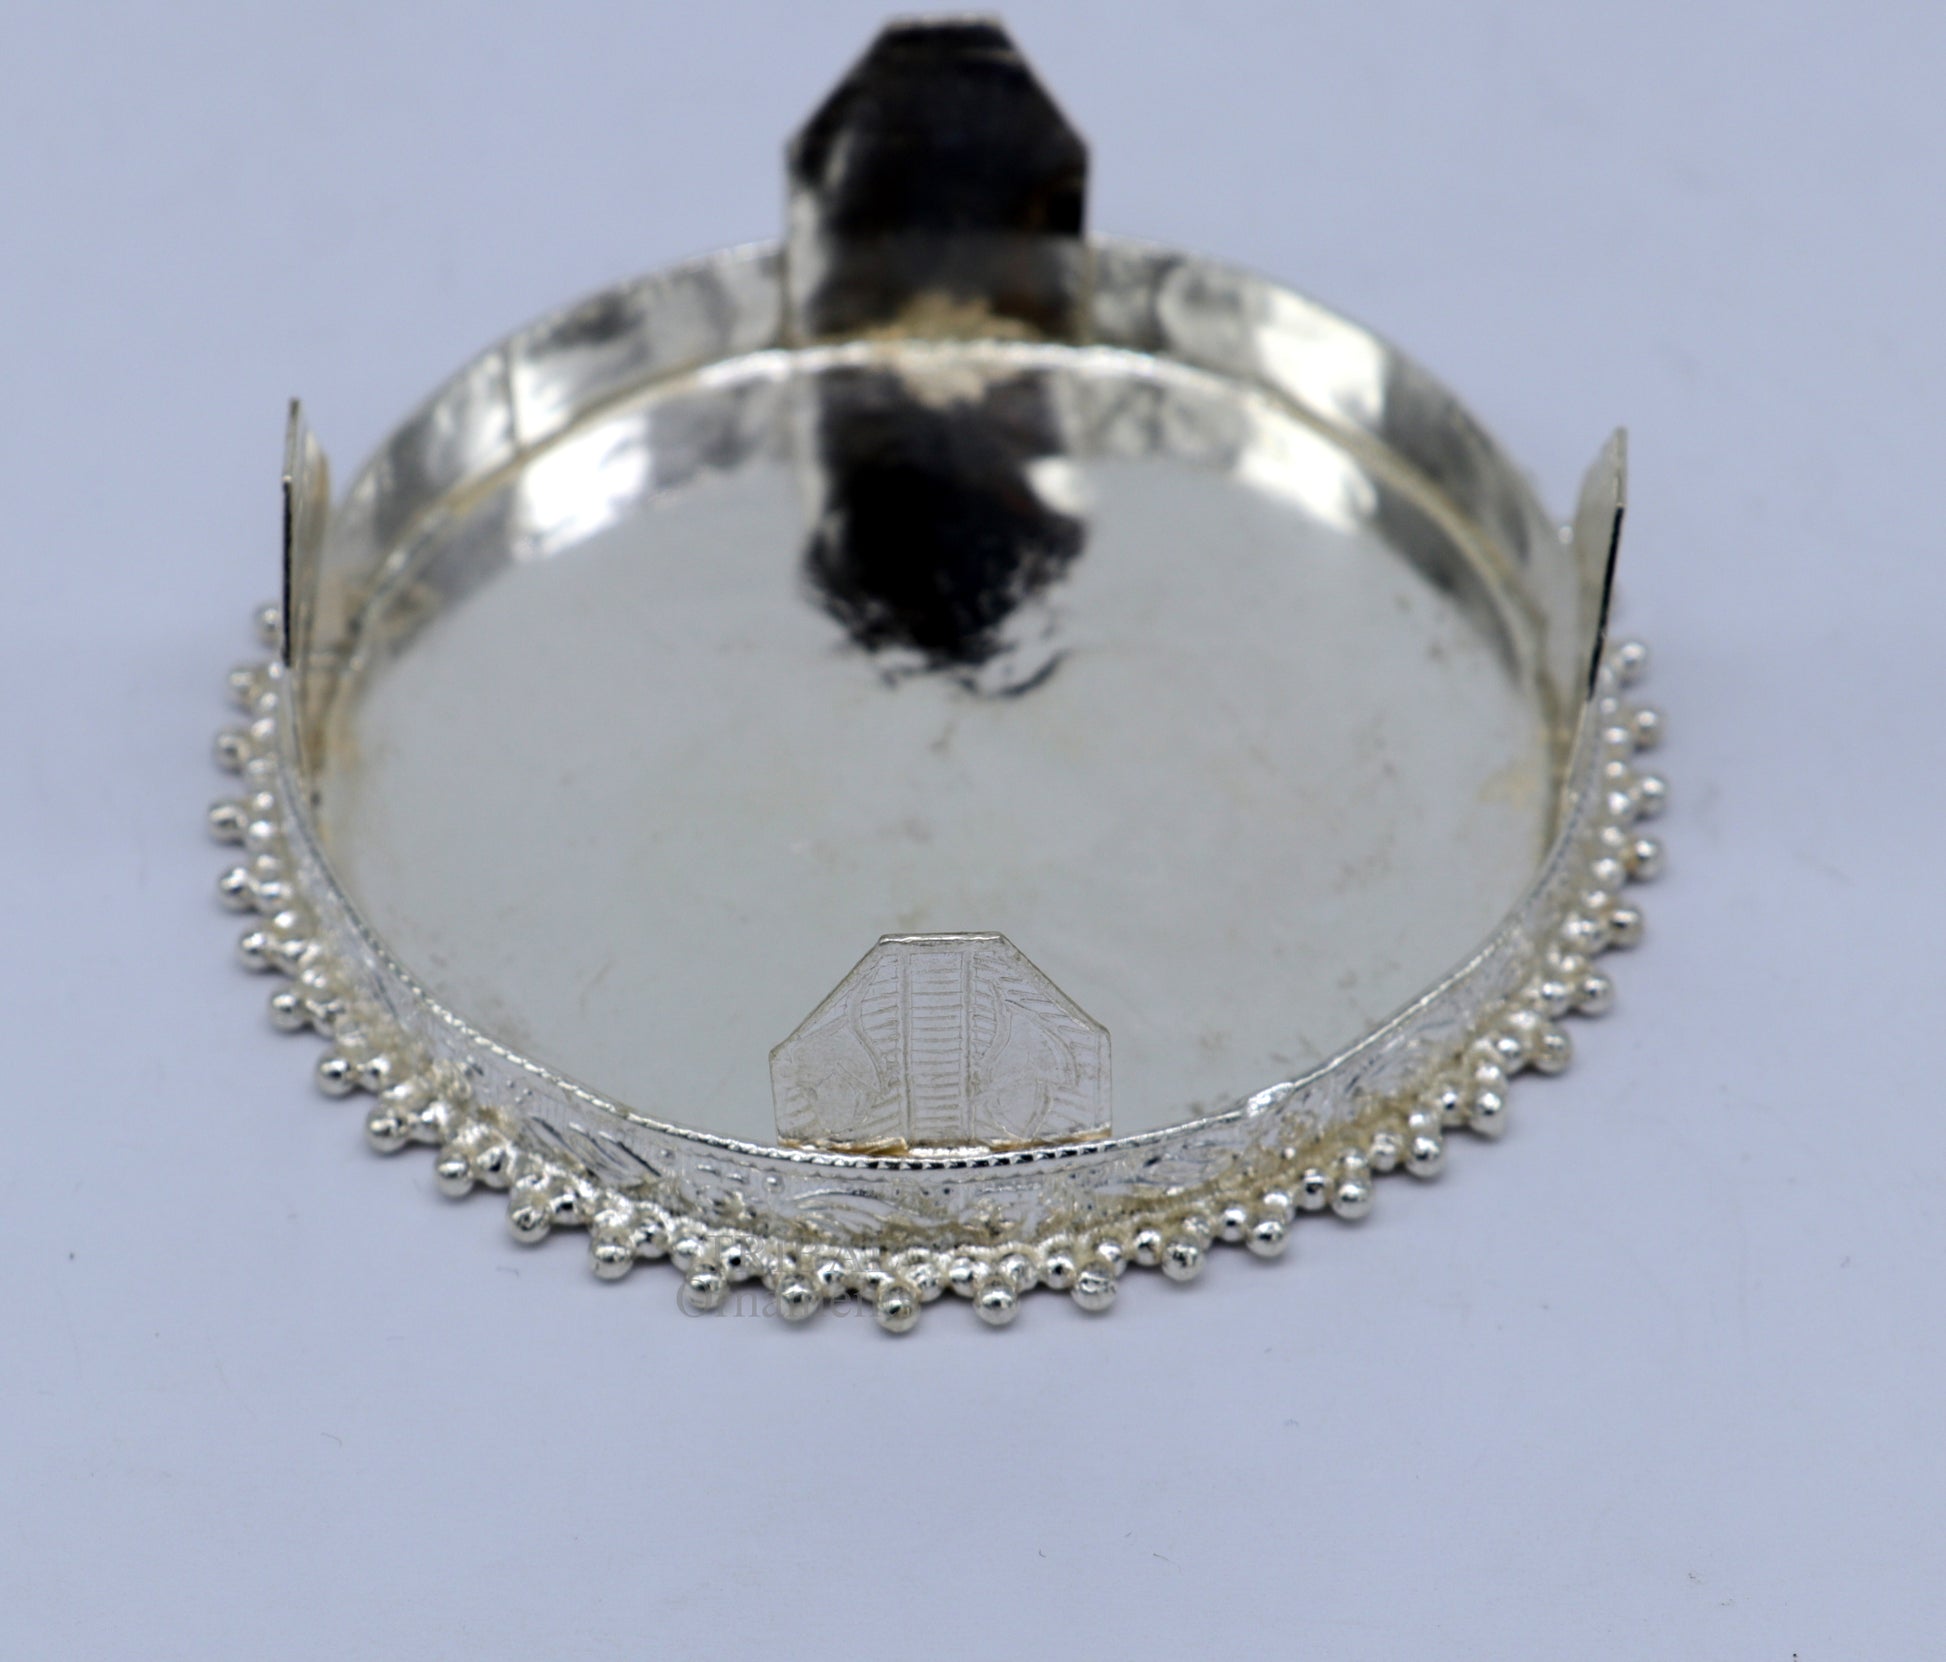 Vintage design Sterling silver handmade customize small oval shape table/bazot/chouki, excellent home puja utensils temple art su427 - TRIBAL ORNAMENTS